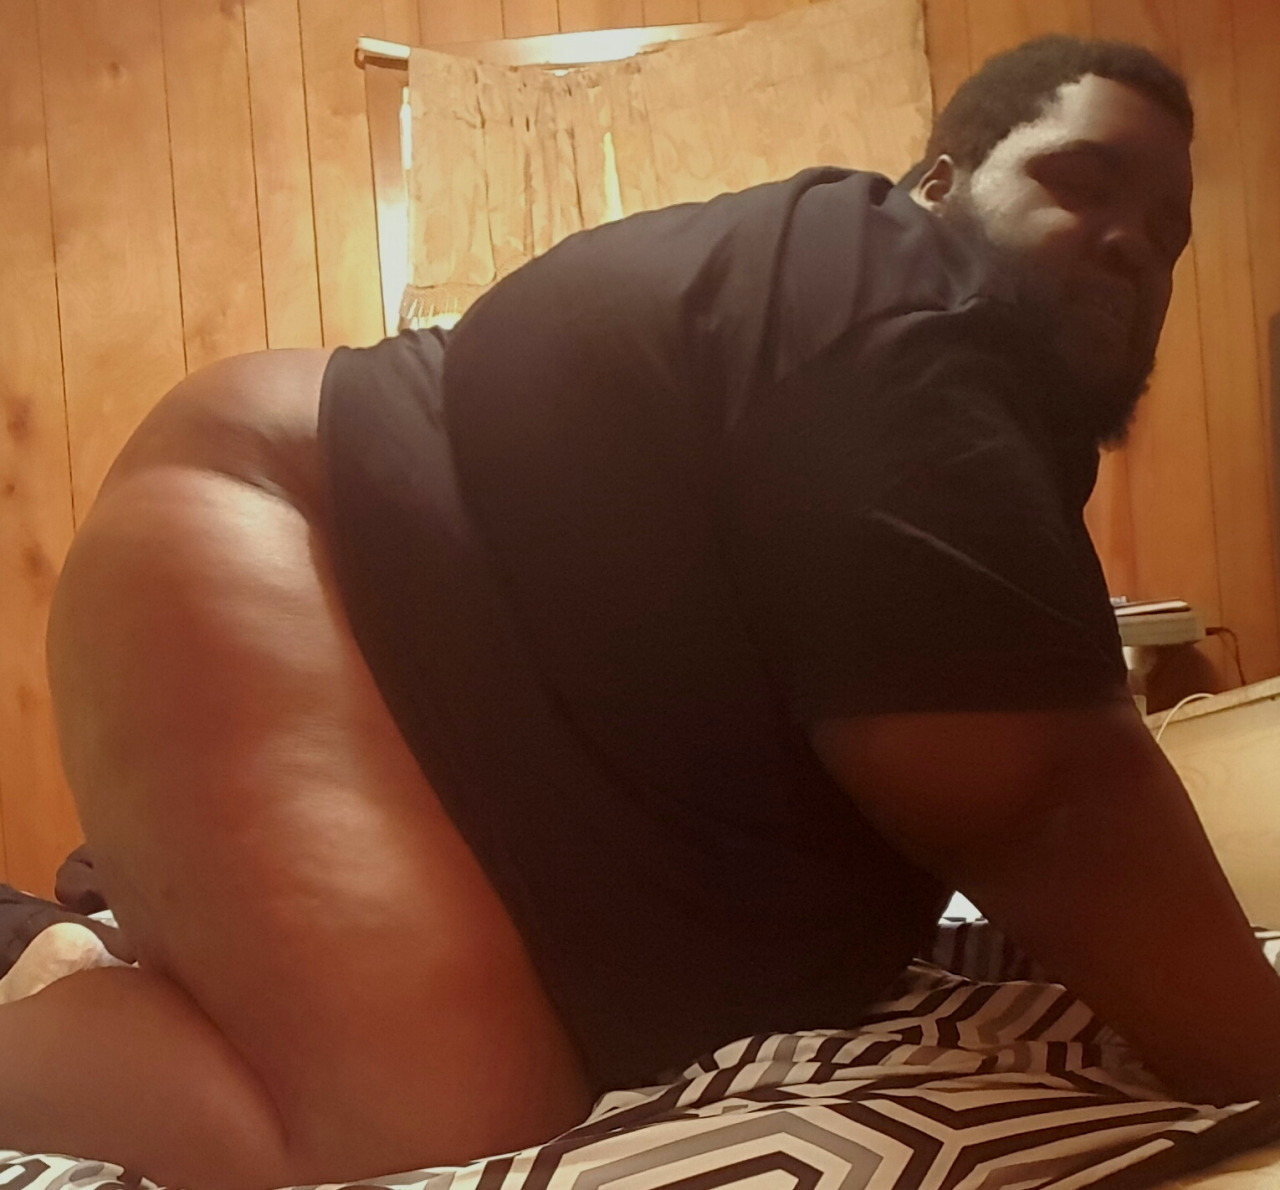 smother-me-in-ur-blubber:  Oh yeah. Look at the size of this dude. Want him to straddle